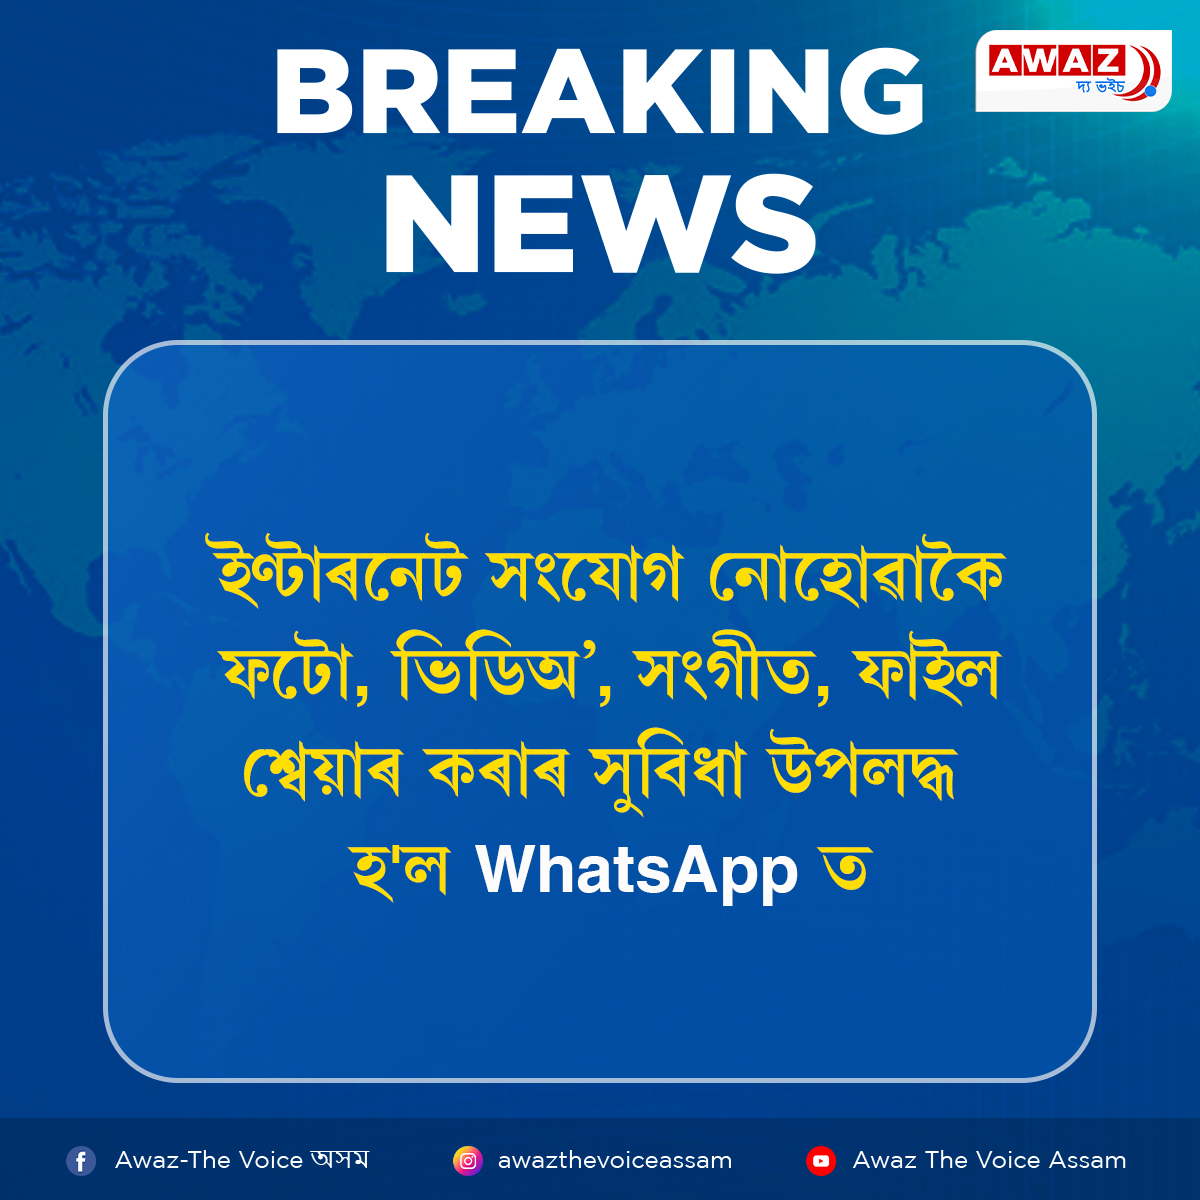 #WhatsApp #India #Newfeatures 

Read More: assam.awazthevoice.in/gadgets-news/w…